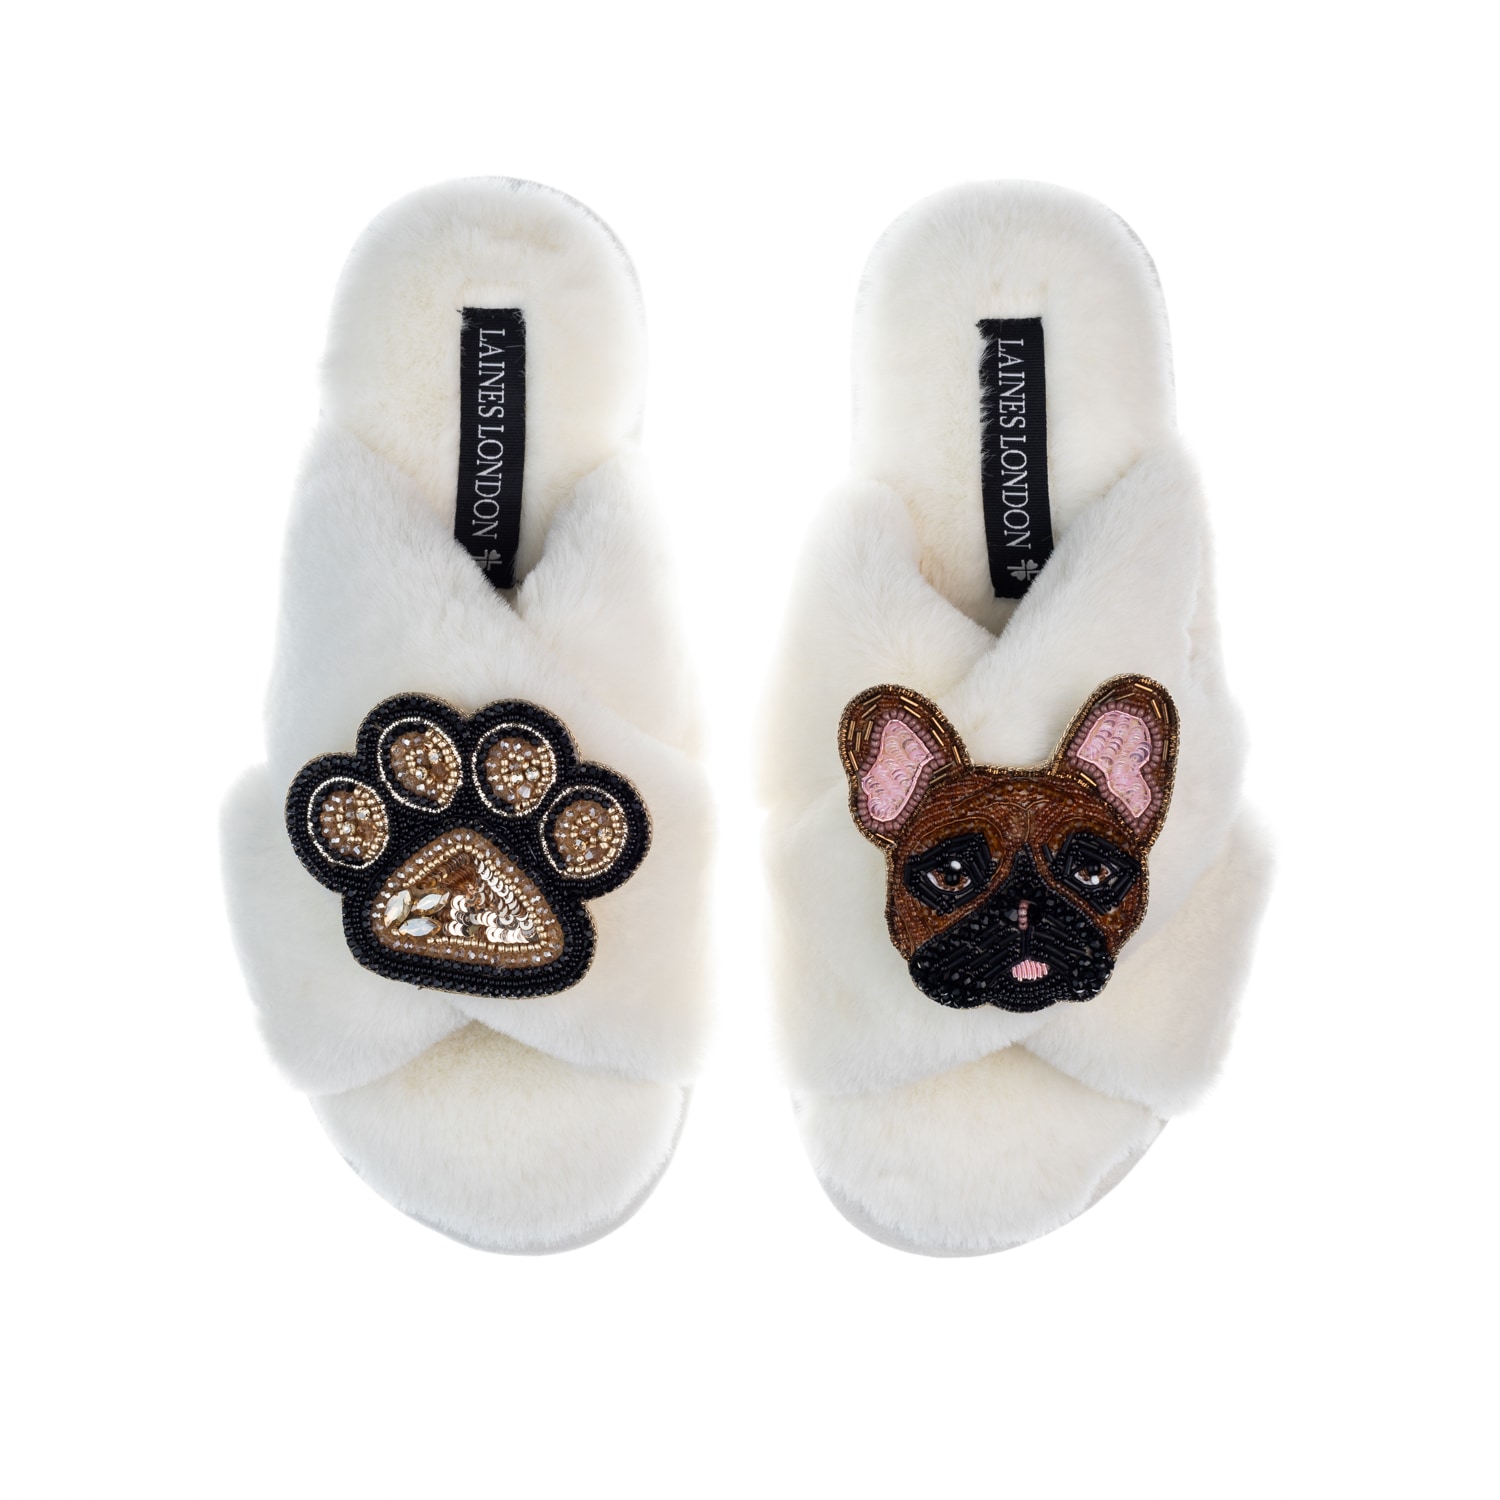 Laines London Women's White Classic Laines Slippers With Cookie The Frenchie & Paw Brooches - Cream